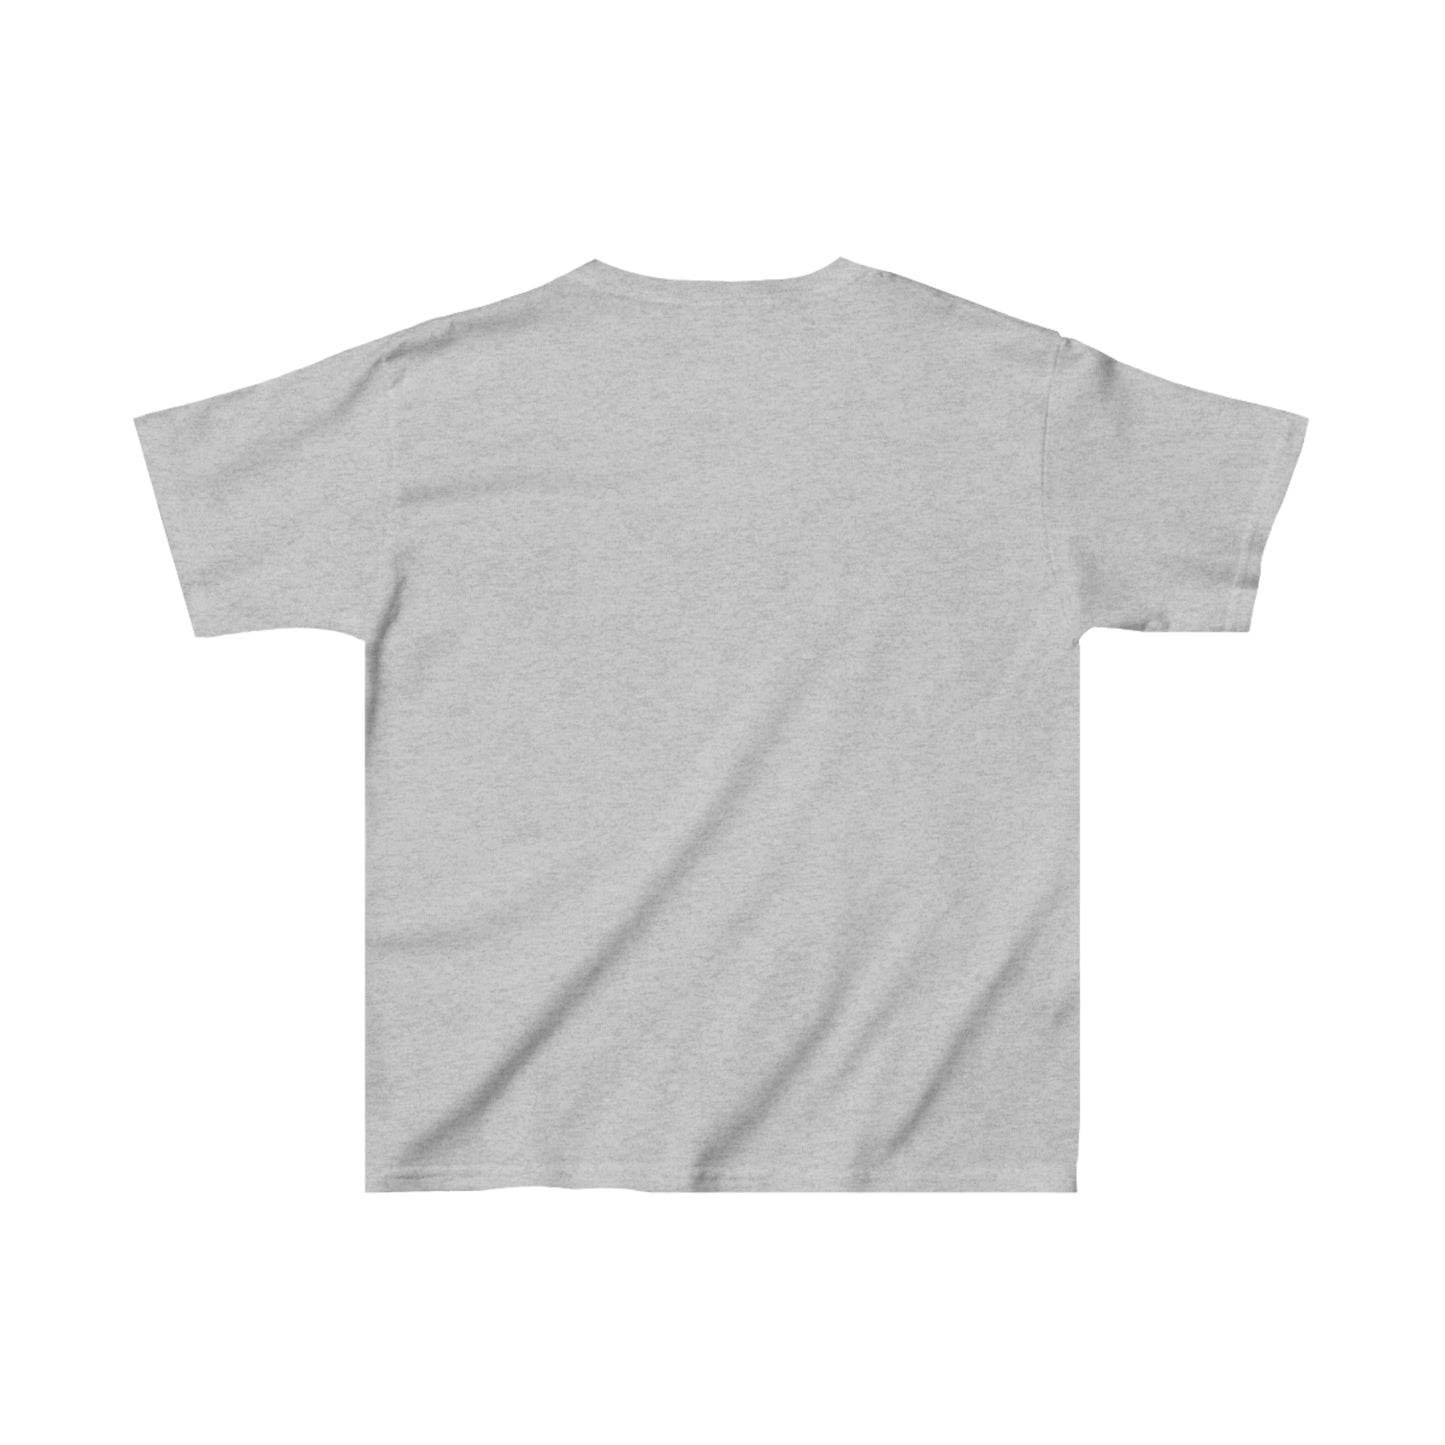 Flat back view of the Sport Grey shirt